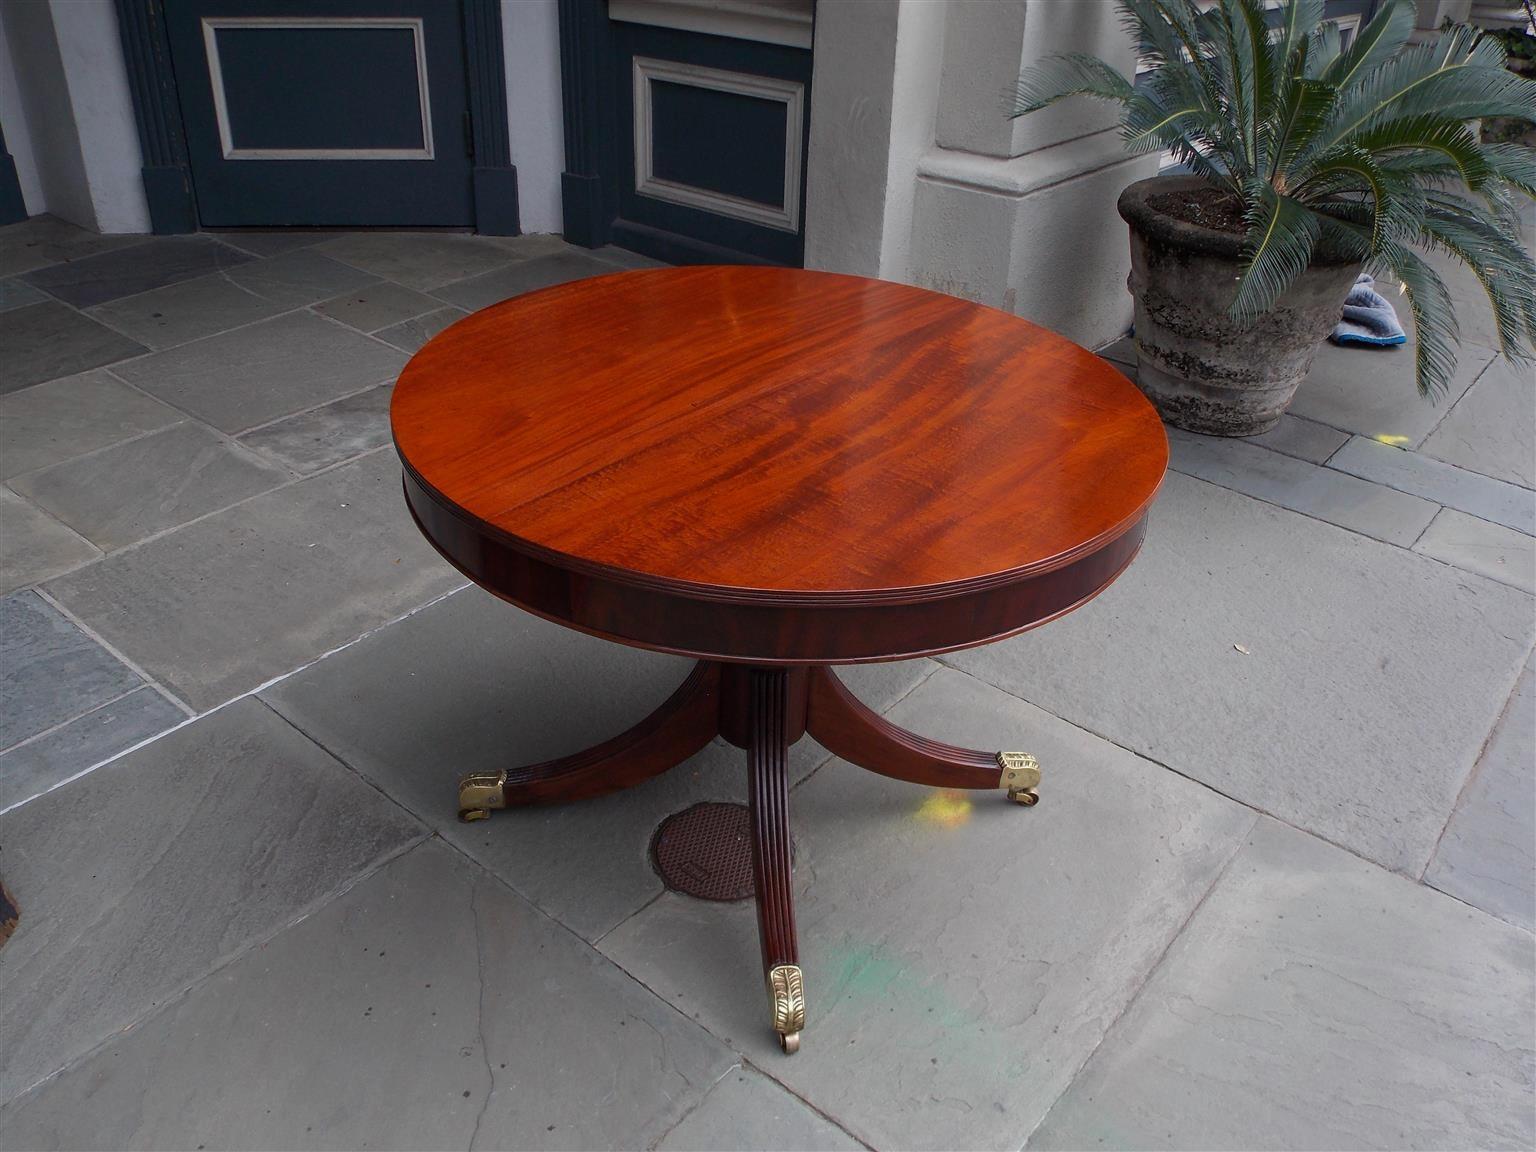 Hand-Carved English Regency Mahogany Drum Table with Original Acanthus Brass Casters C. 1815 For Sale